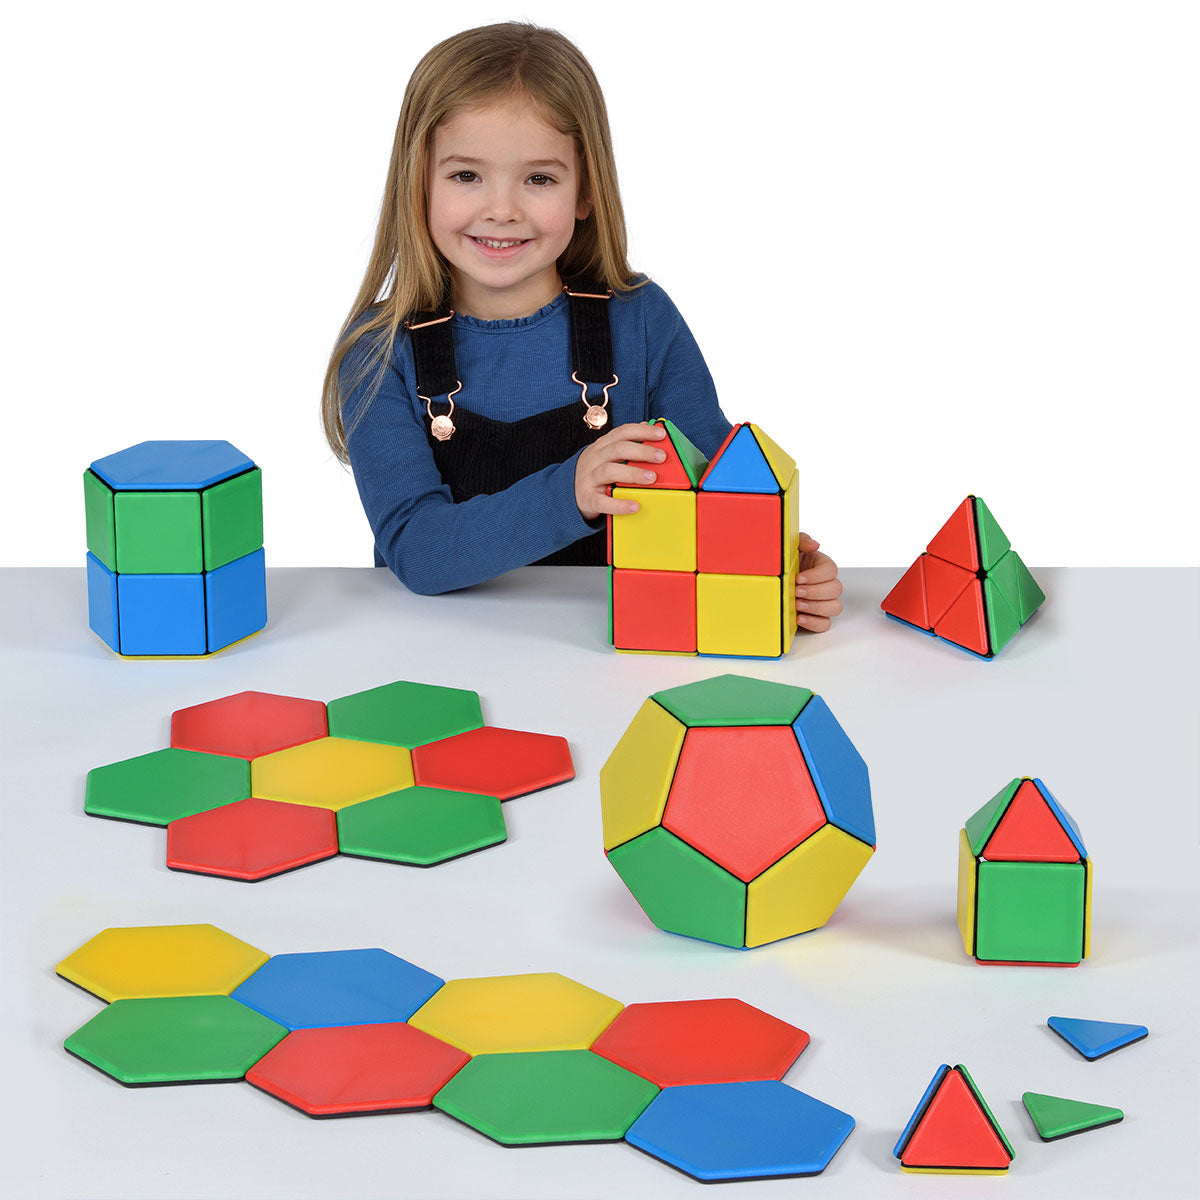 Solid Magnetic Polydron Essential Shapes Set, The Solid Magnetic Polydron Essential Shapes Set is the perfect tool for building complex shapes and teaching geometry, construction, and polarity to larger groups of children. With a total of 104 pieces, including 36 squares, 36 equilateral triangles, 12 pentagons, and 20 hexagons, this set offers endless possibilities for creative exploration.This Solid Magnetic Polydron Essential Shapes Set is ideal for educators and parents looking to engage children in hand